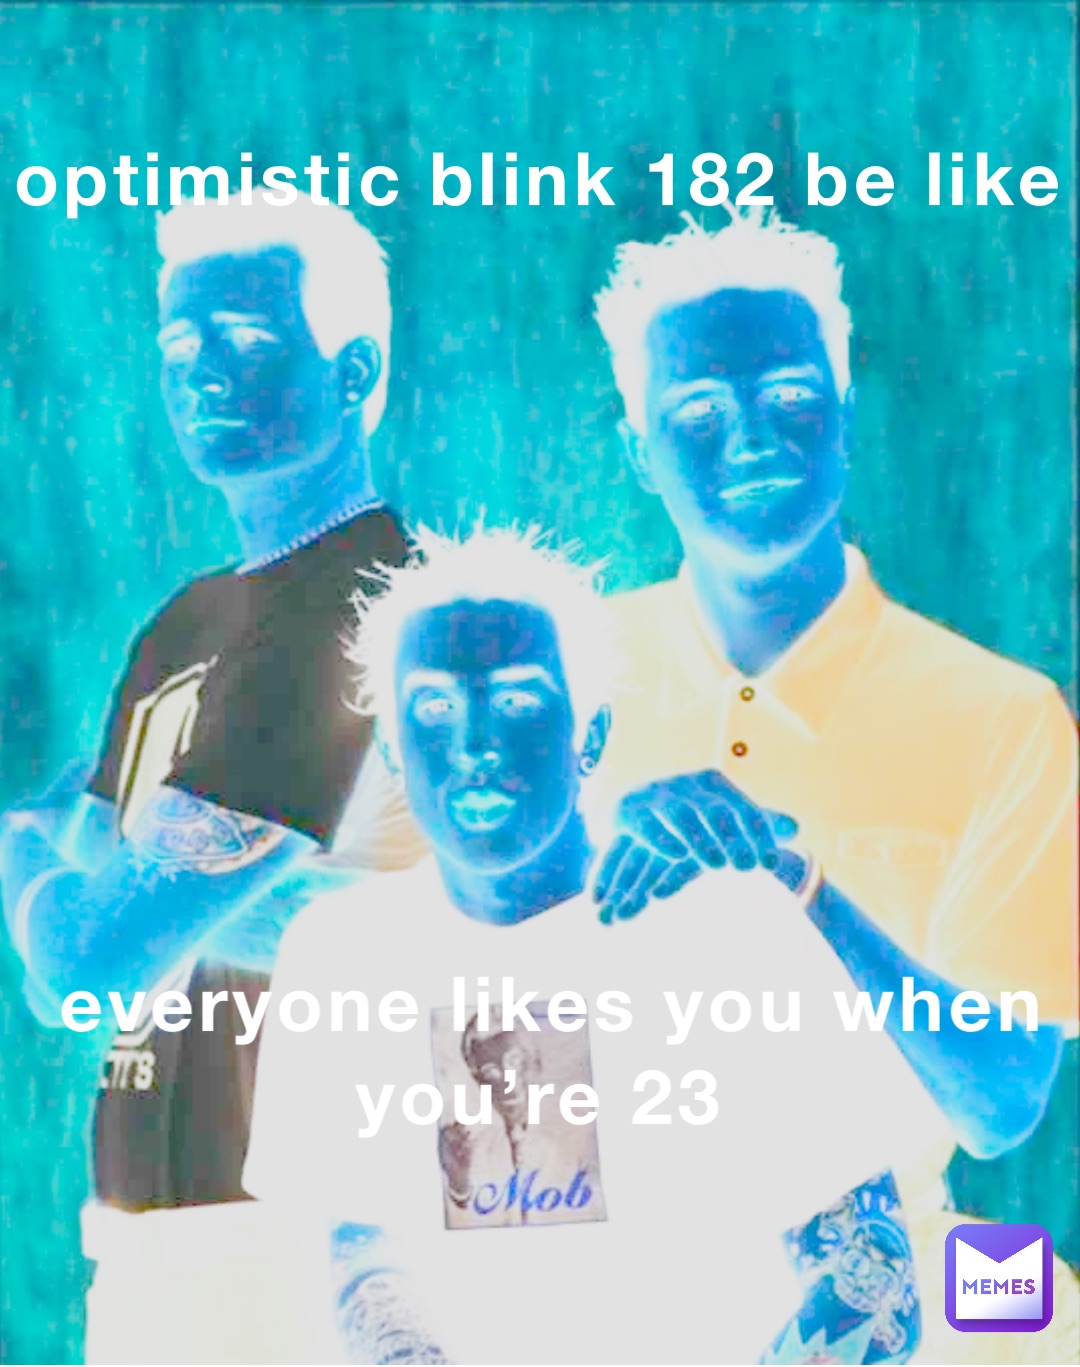 optimistic blink 182 be like everyone likes you when you’re 23